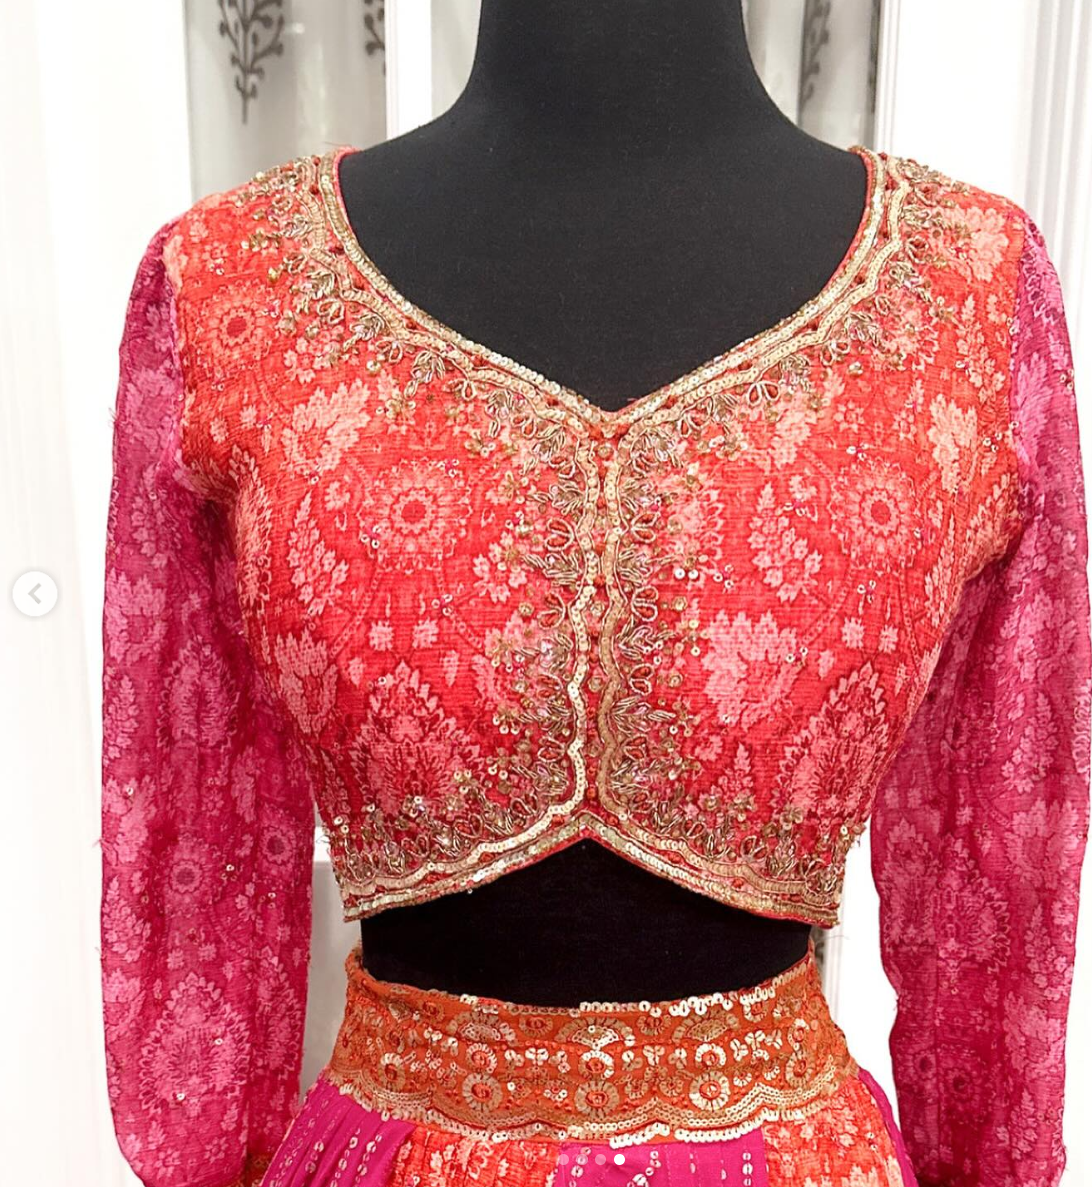 Elegant Georgette Sequin Lehenga Choli crafted in stunning red and pink hues kali design with work blouse organza dupatta wedding parytywear